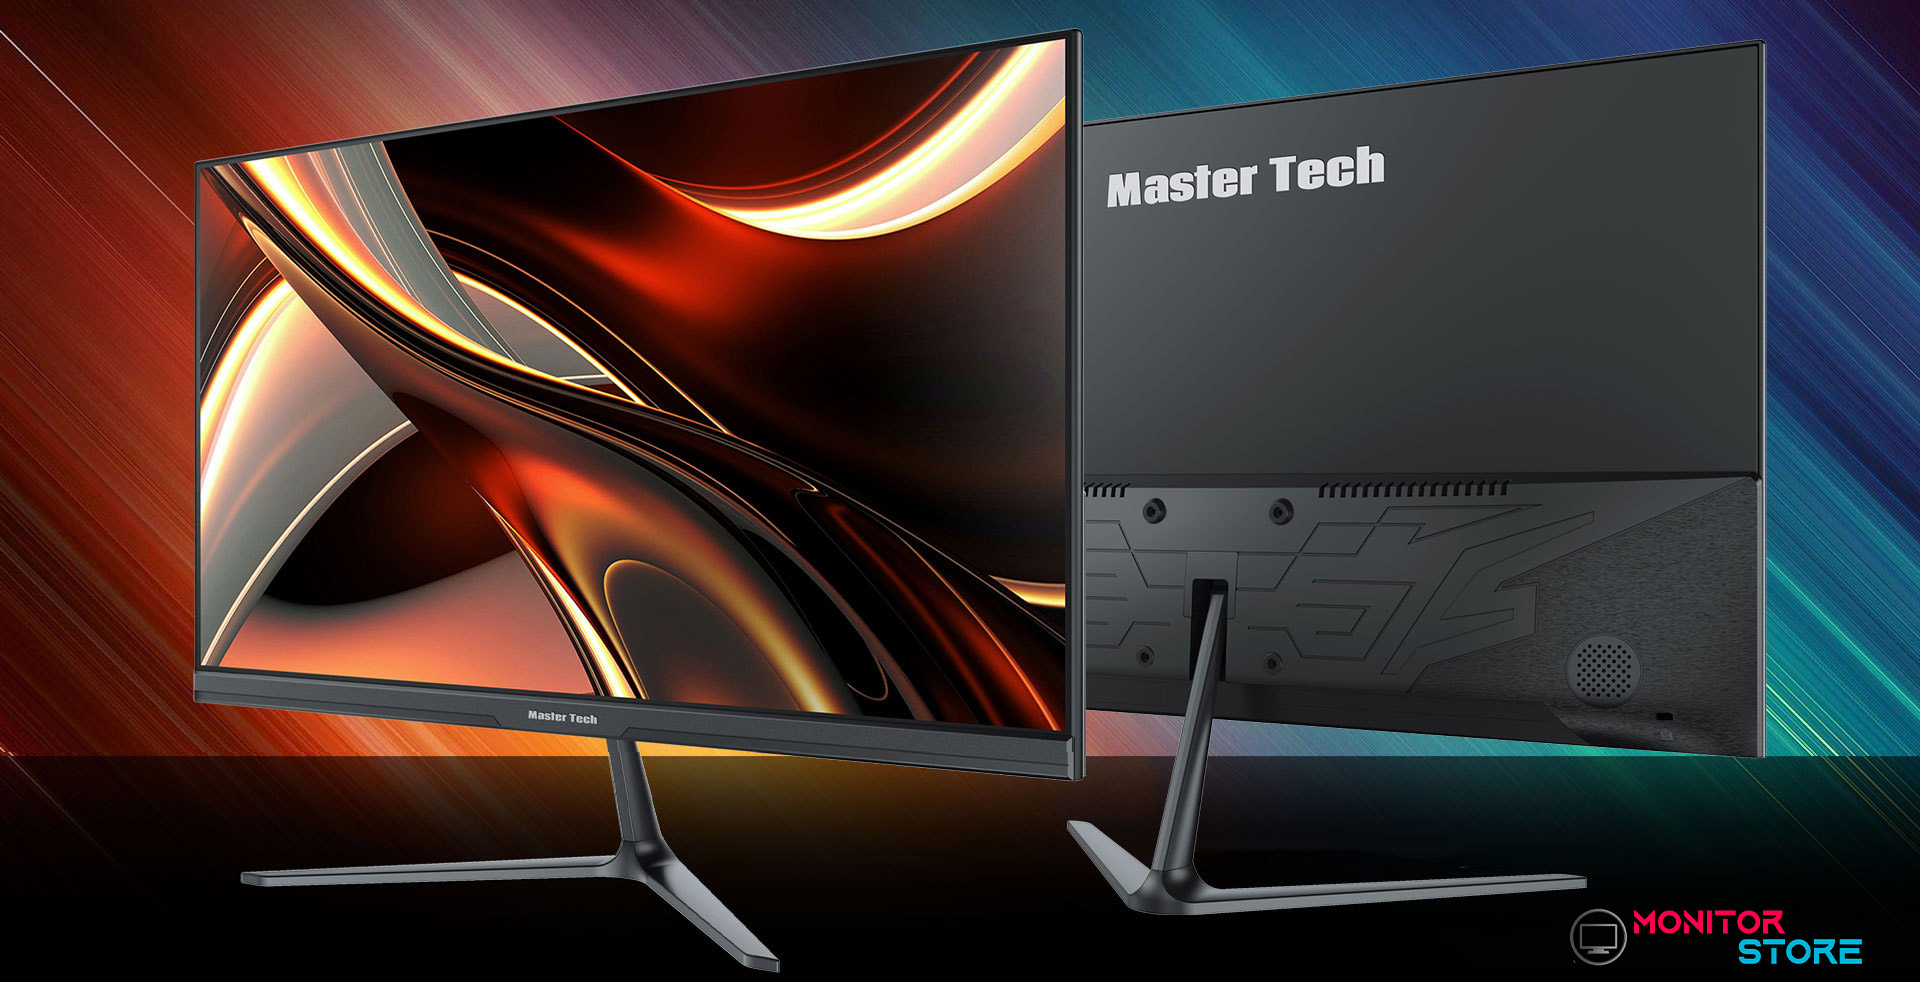 MasterTech-VY248HS-24INCH-MONITOR